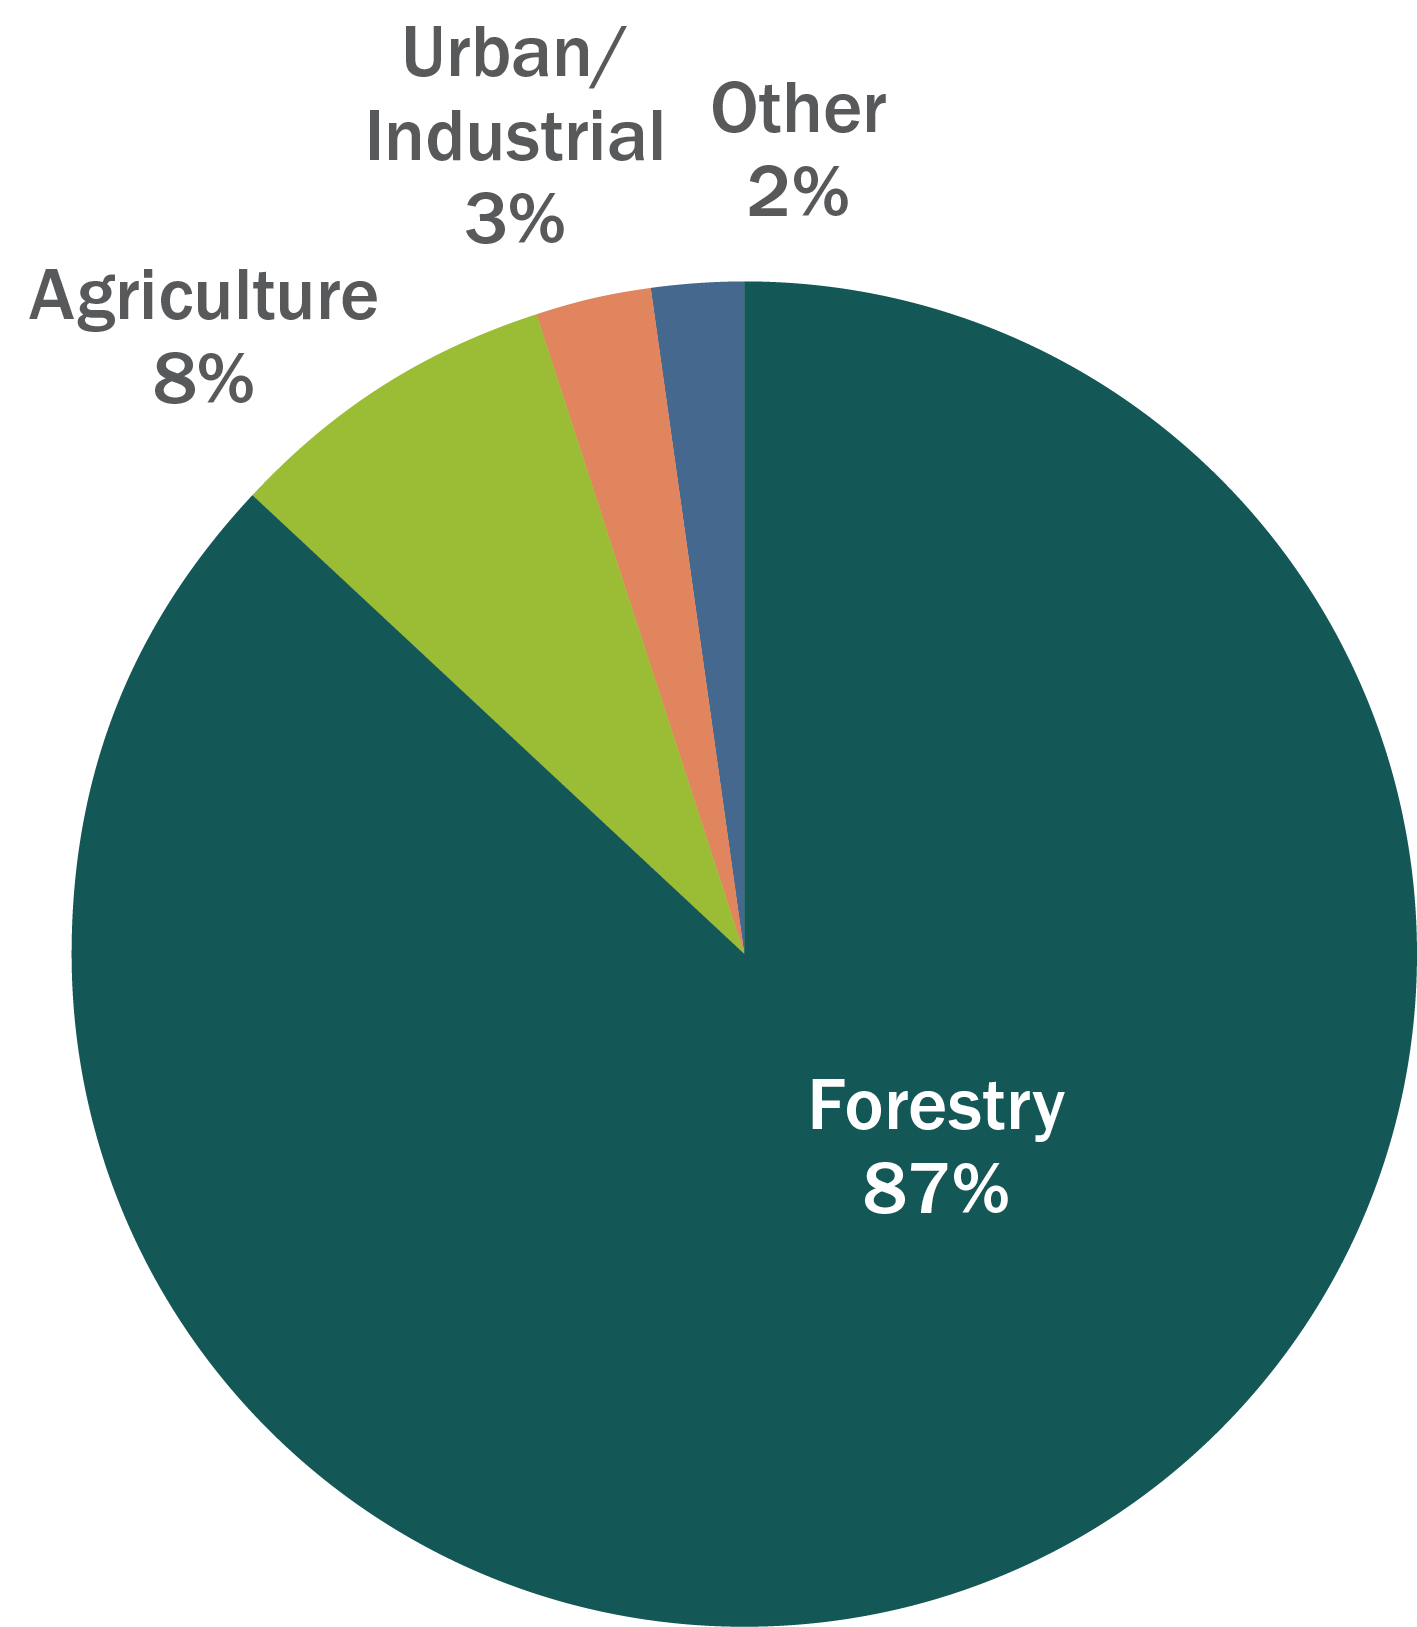 Chart shows 87% of Basin land is in use for forestry, 8% for agriculture, 3% urban and 2% other uses.